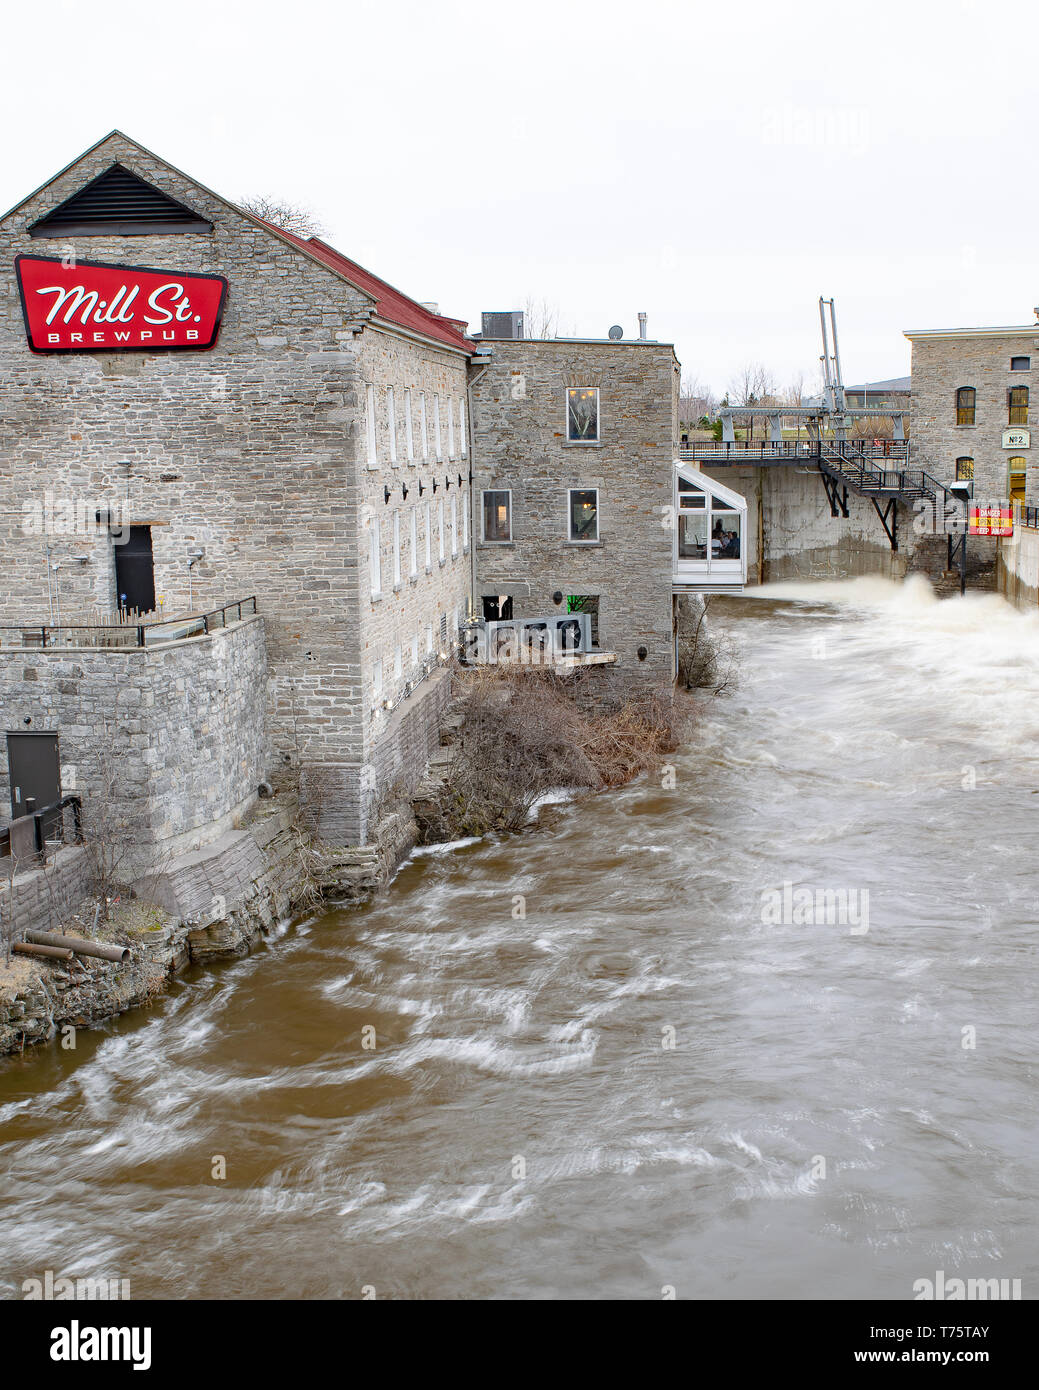 Extreme flooding of the Ottawa River in April 2019 forced Hydro Ottawa floodgates to be opened just above the Mill Street Pub near Chaudiere Falls. Stock Photo